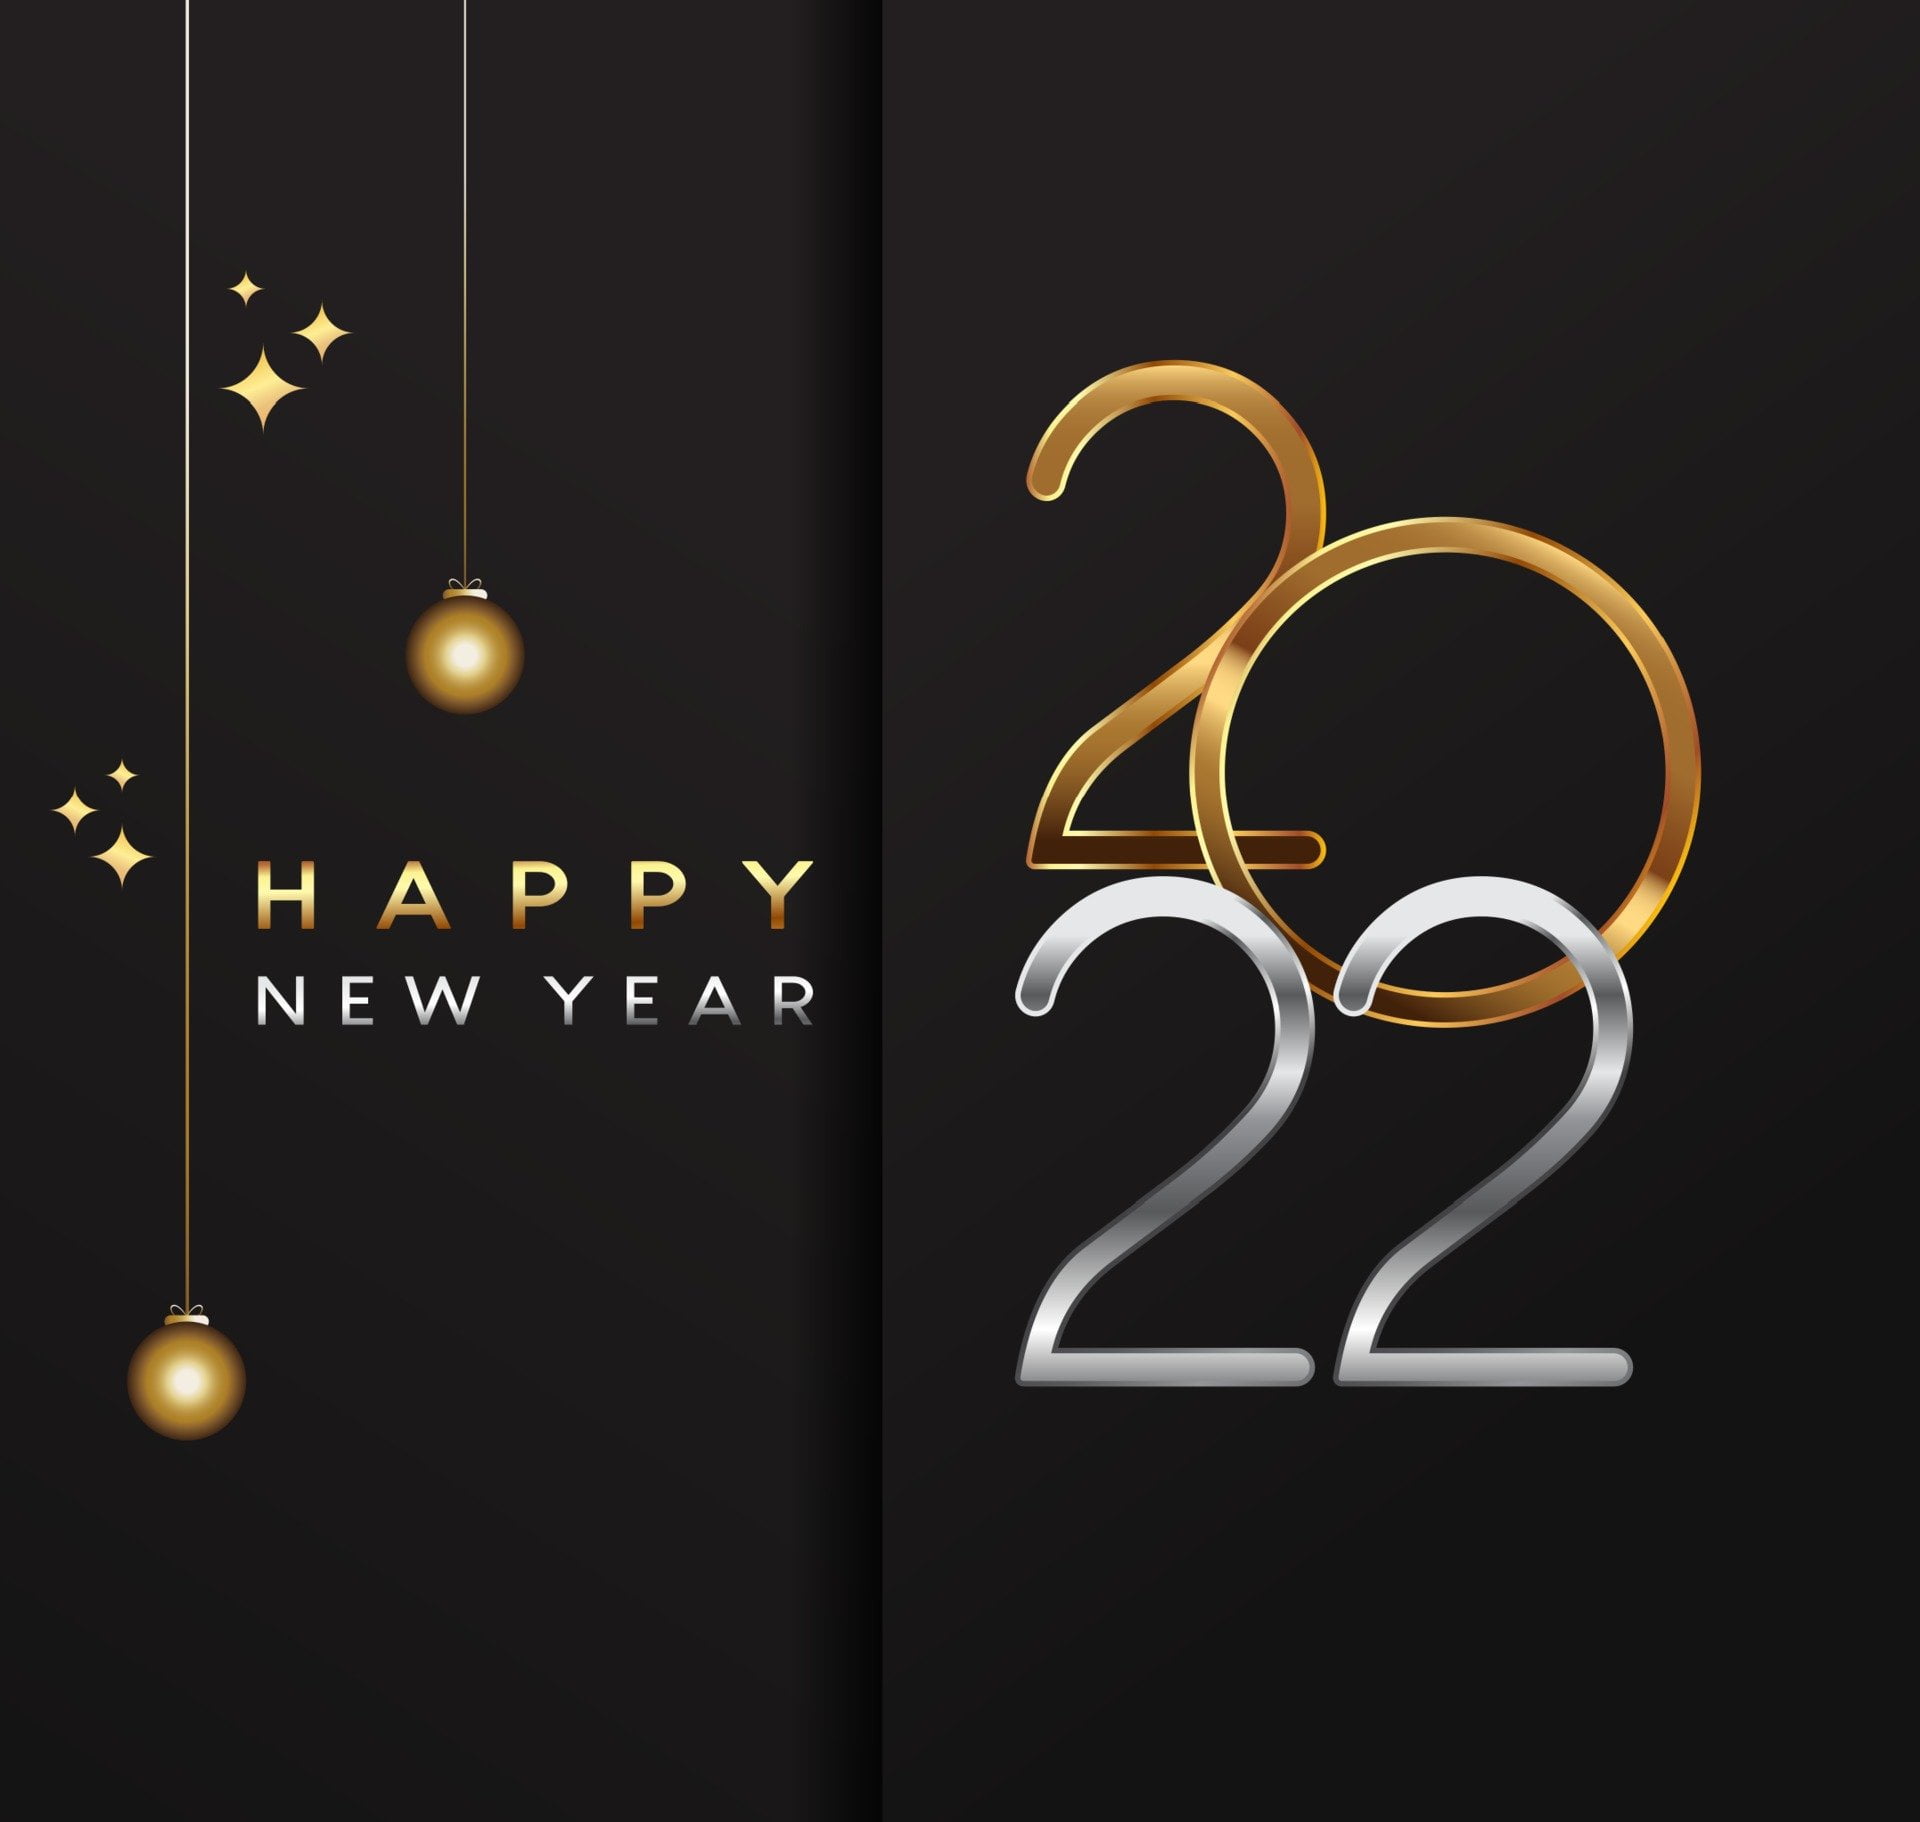 happy-new-year-2022-new-year-shining-background-vector